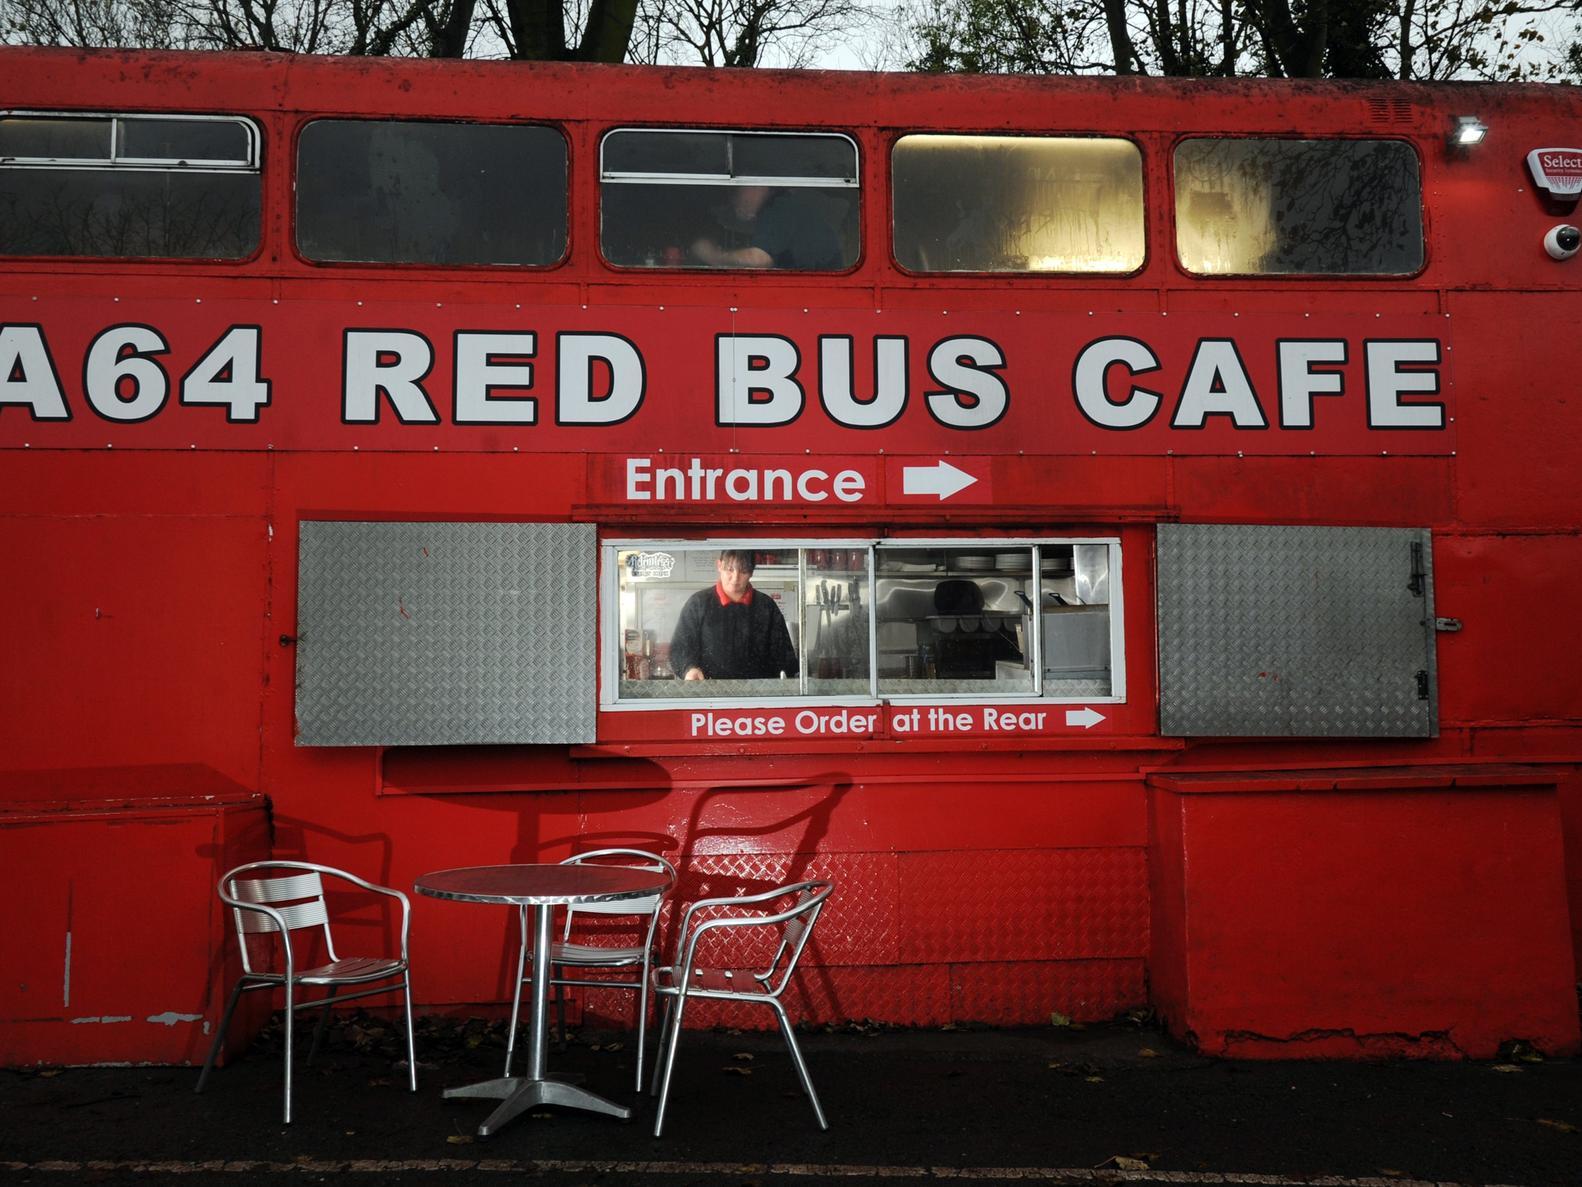 You knew you were on the way to the east coast when you passed the A64 Red Bus Cafe. Gone but not forgotten.